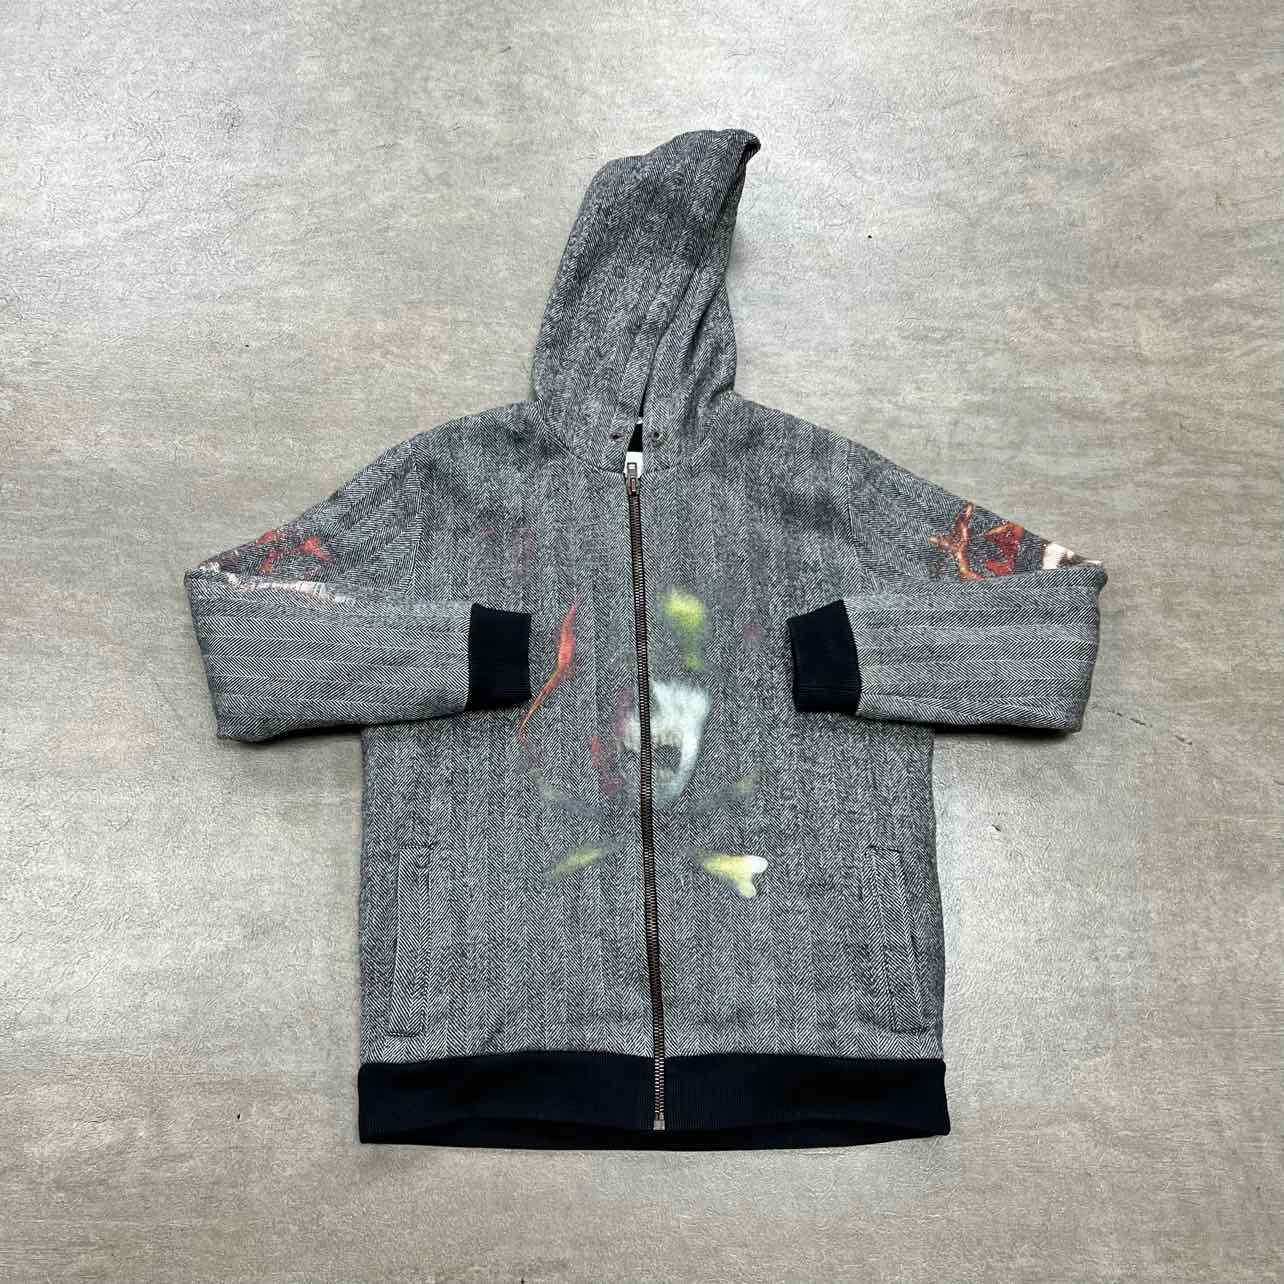 Givenchy Zip Up "HEAVY METAL" Grey Used Size M